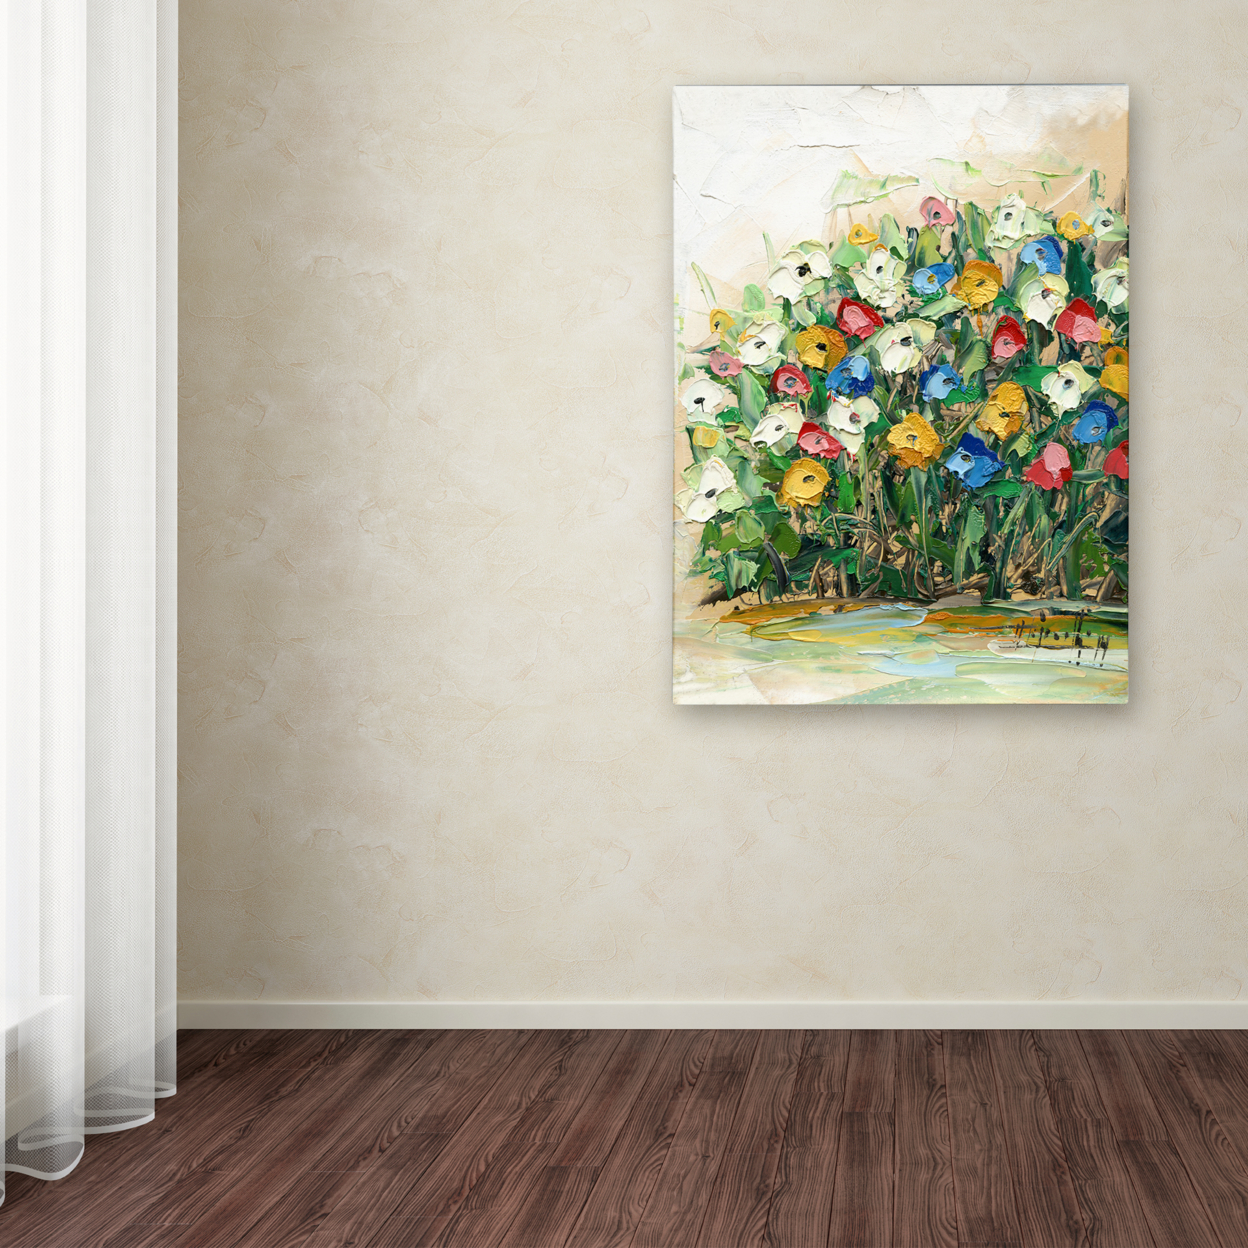 Hai Odelia 'Spring Flowers In A Vase 10' Canvas Wall Art 35 X 47 Inches